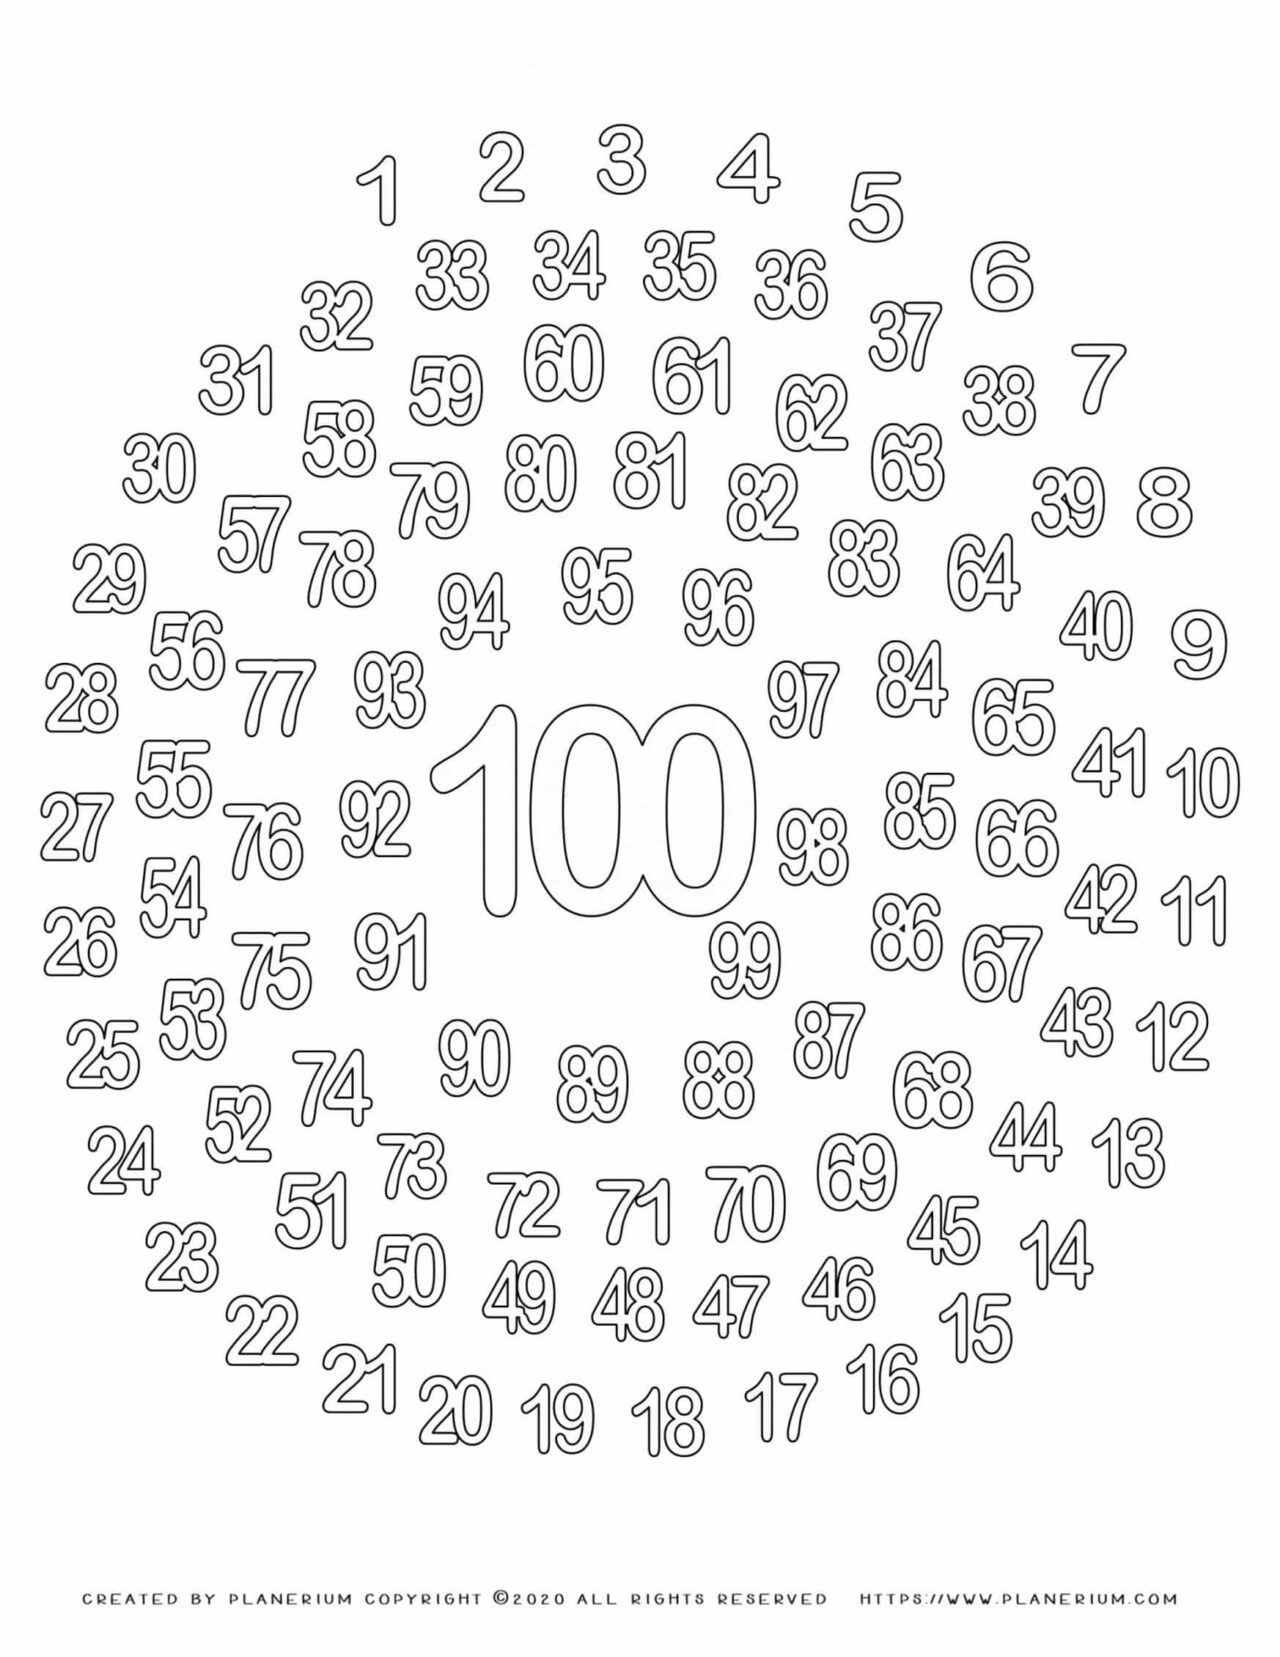 100 Days of School - Coloring Page - 1 to 100 Spiral | Planerium